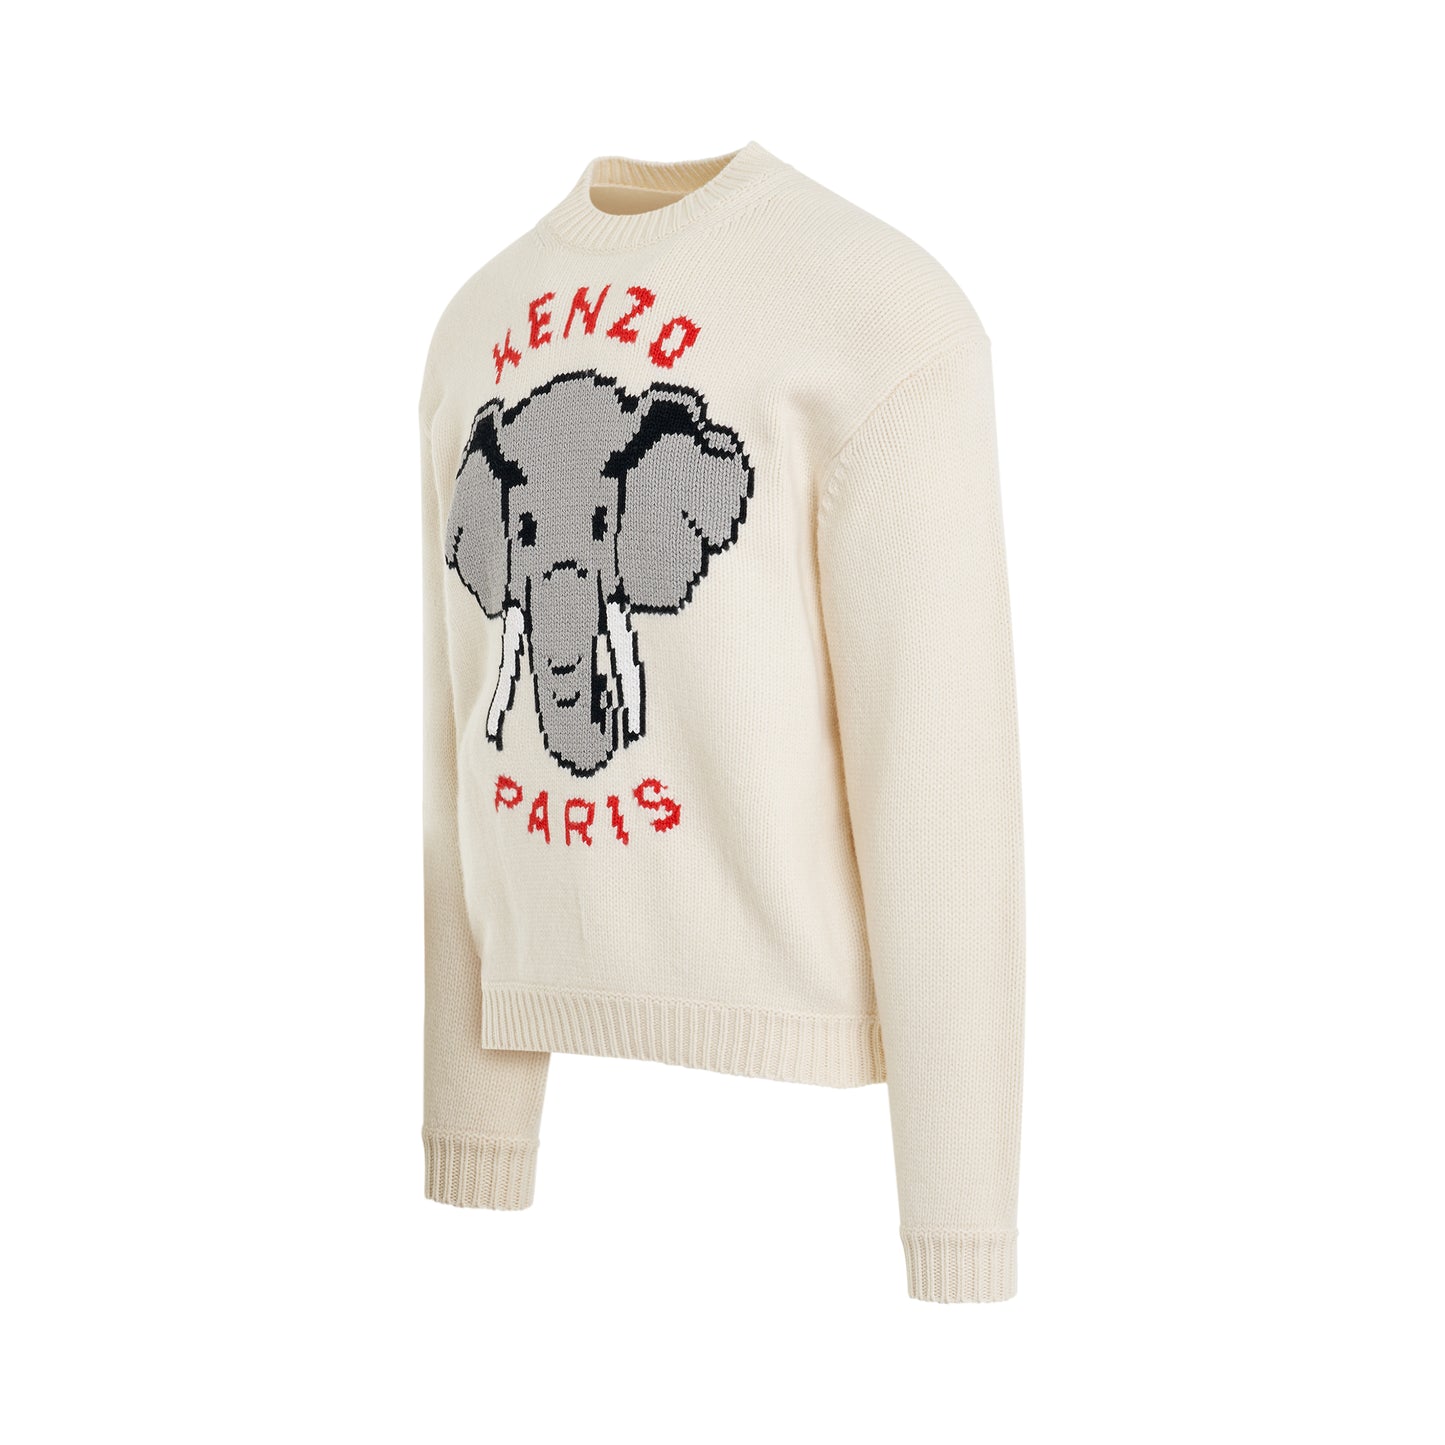 Kenzo Elephant Knit Sweater in Off White